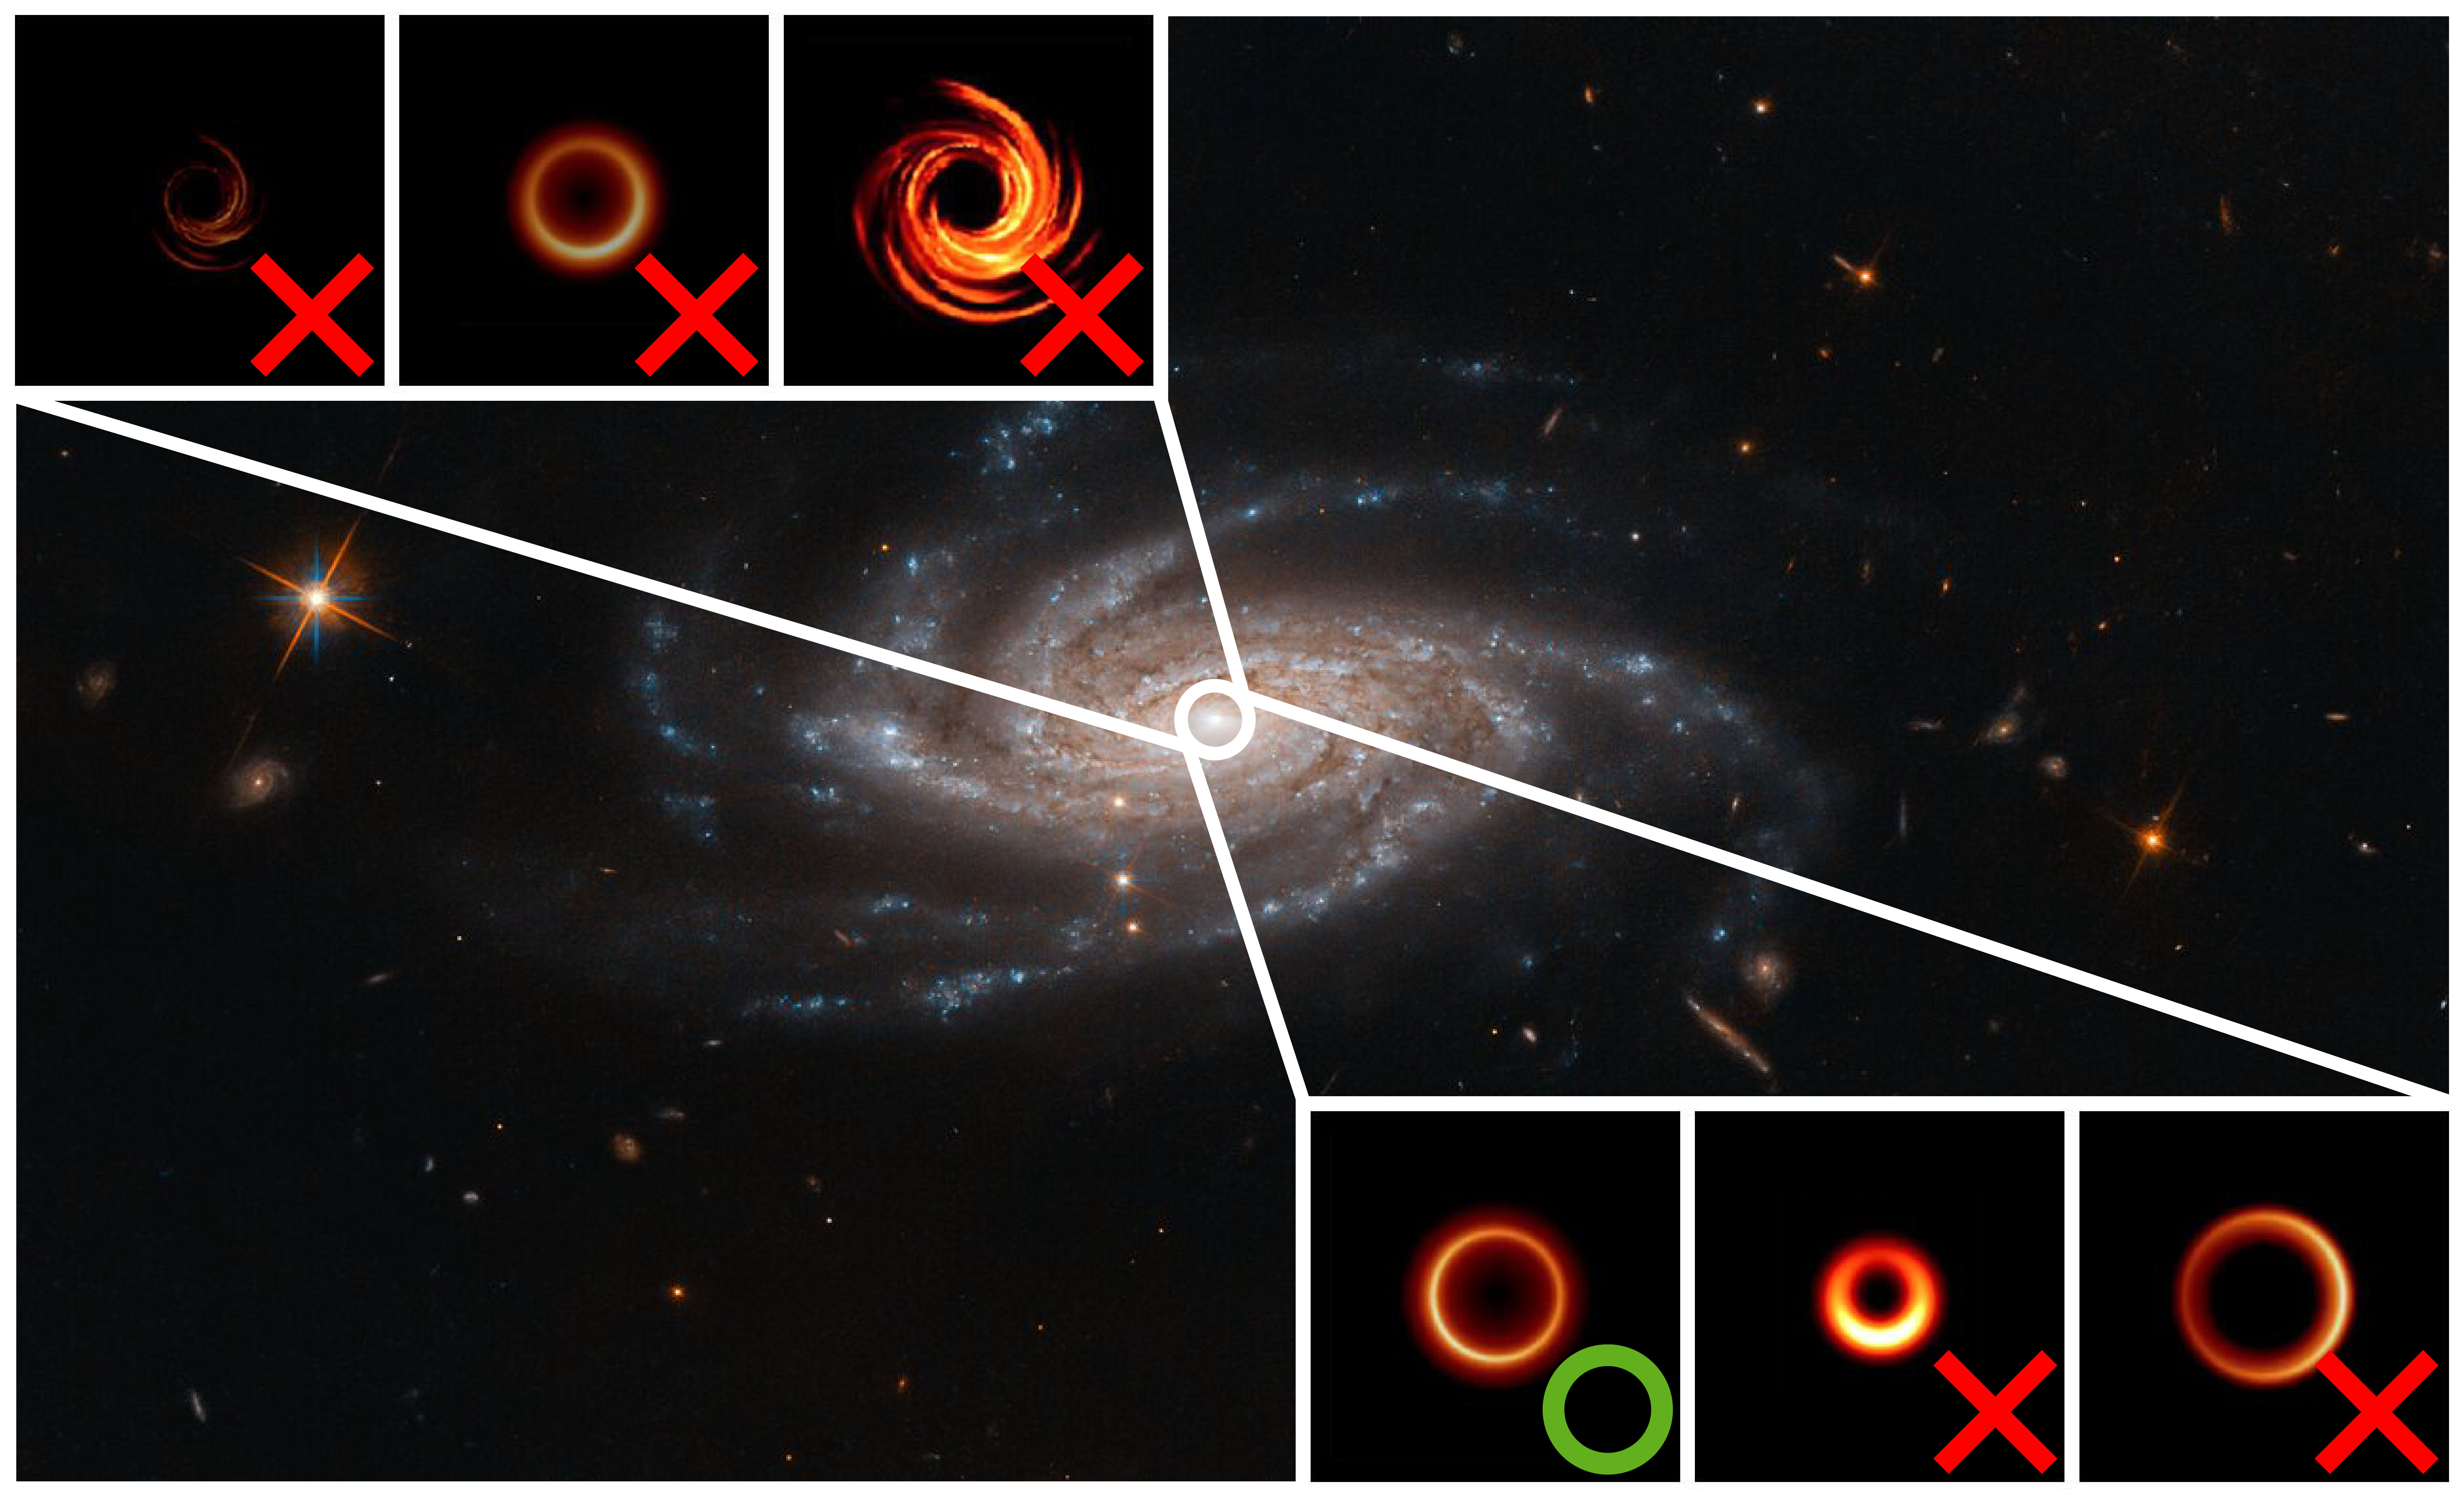 Machine learning tries different pairings of galaxy and black hole models